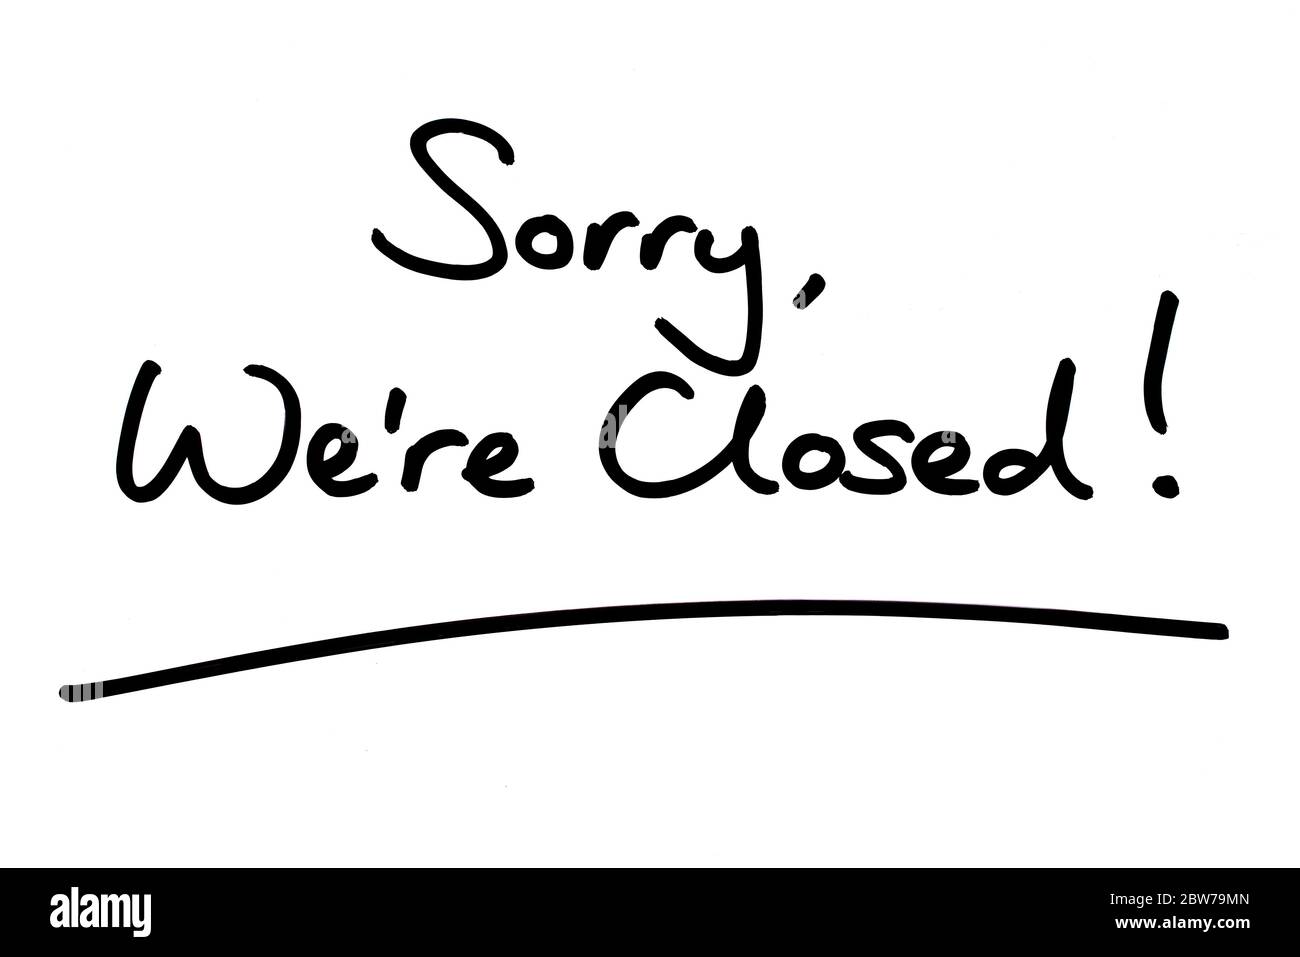 Sorry Were Closed! handwritten on a white background. Stock Photo